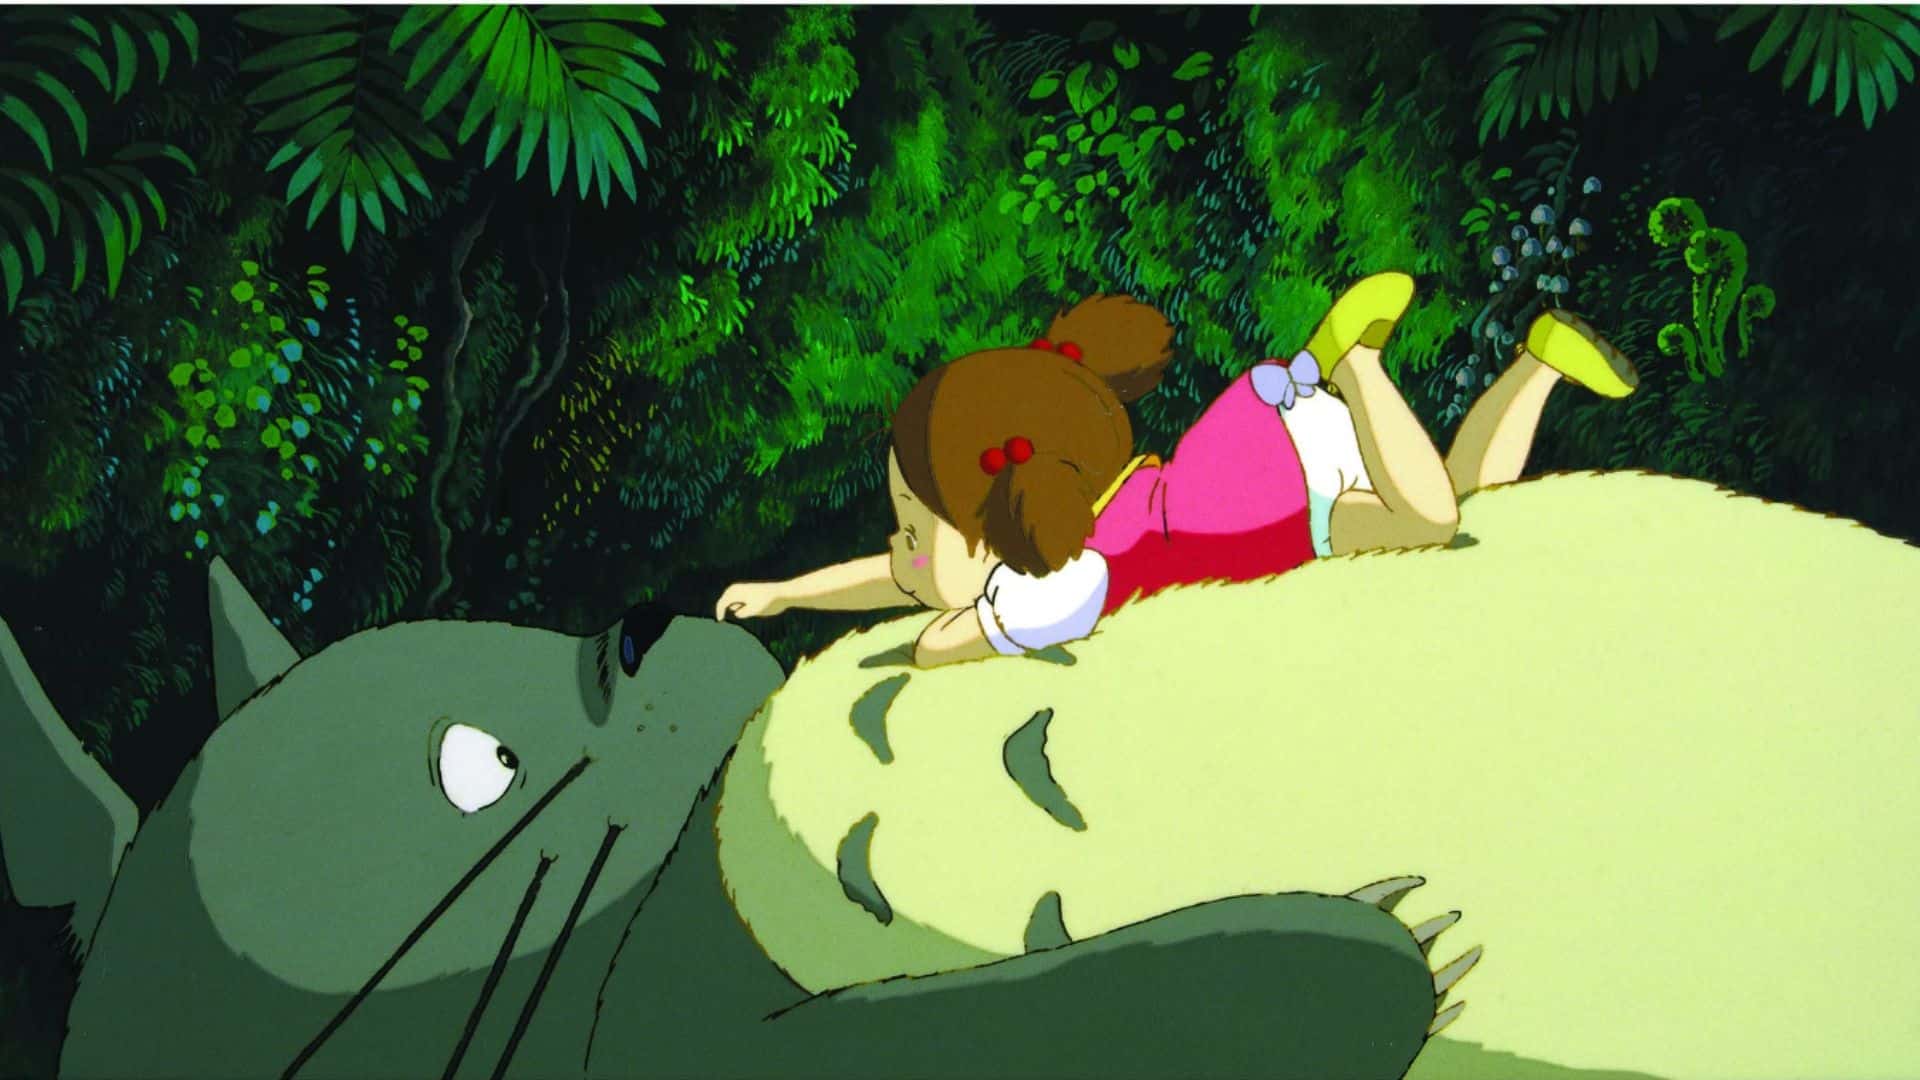 Mei lies on Totoro’s belly in this image from Studio Ghibli.